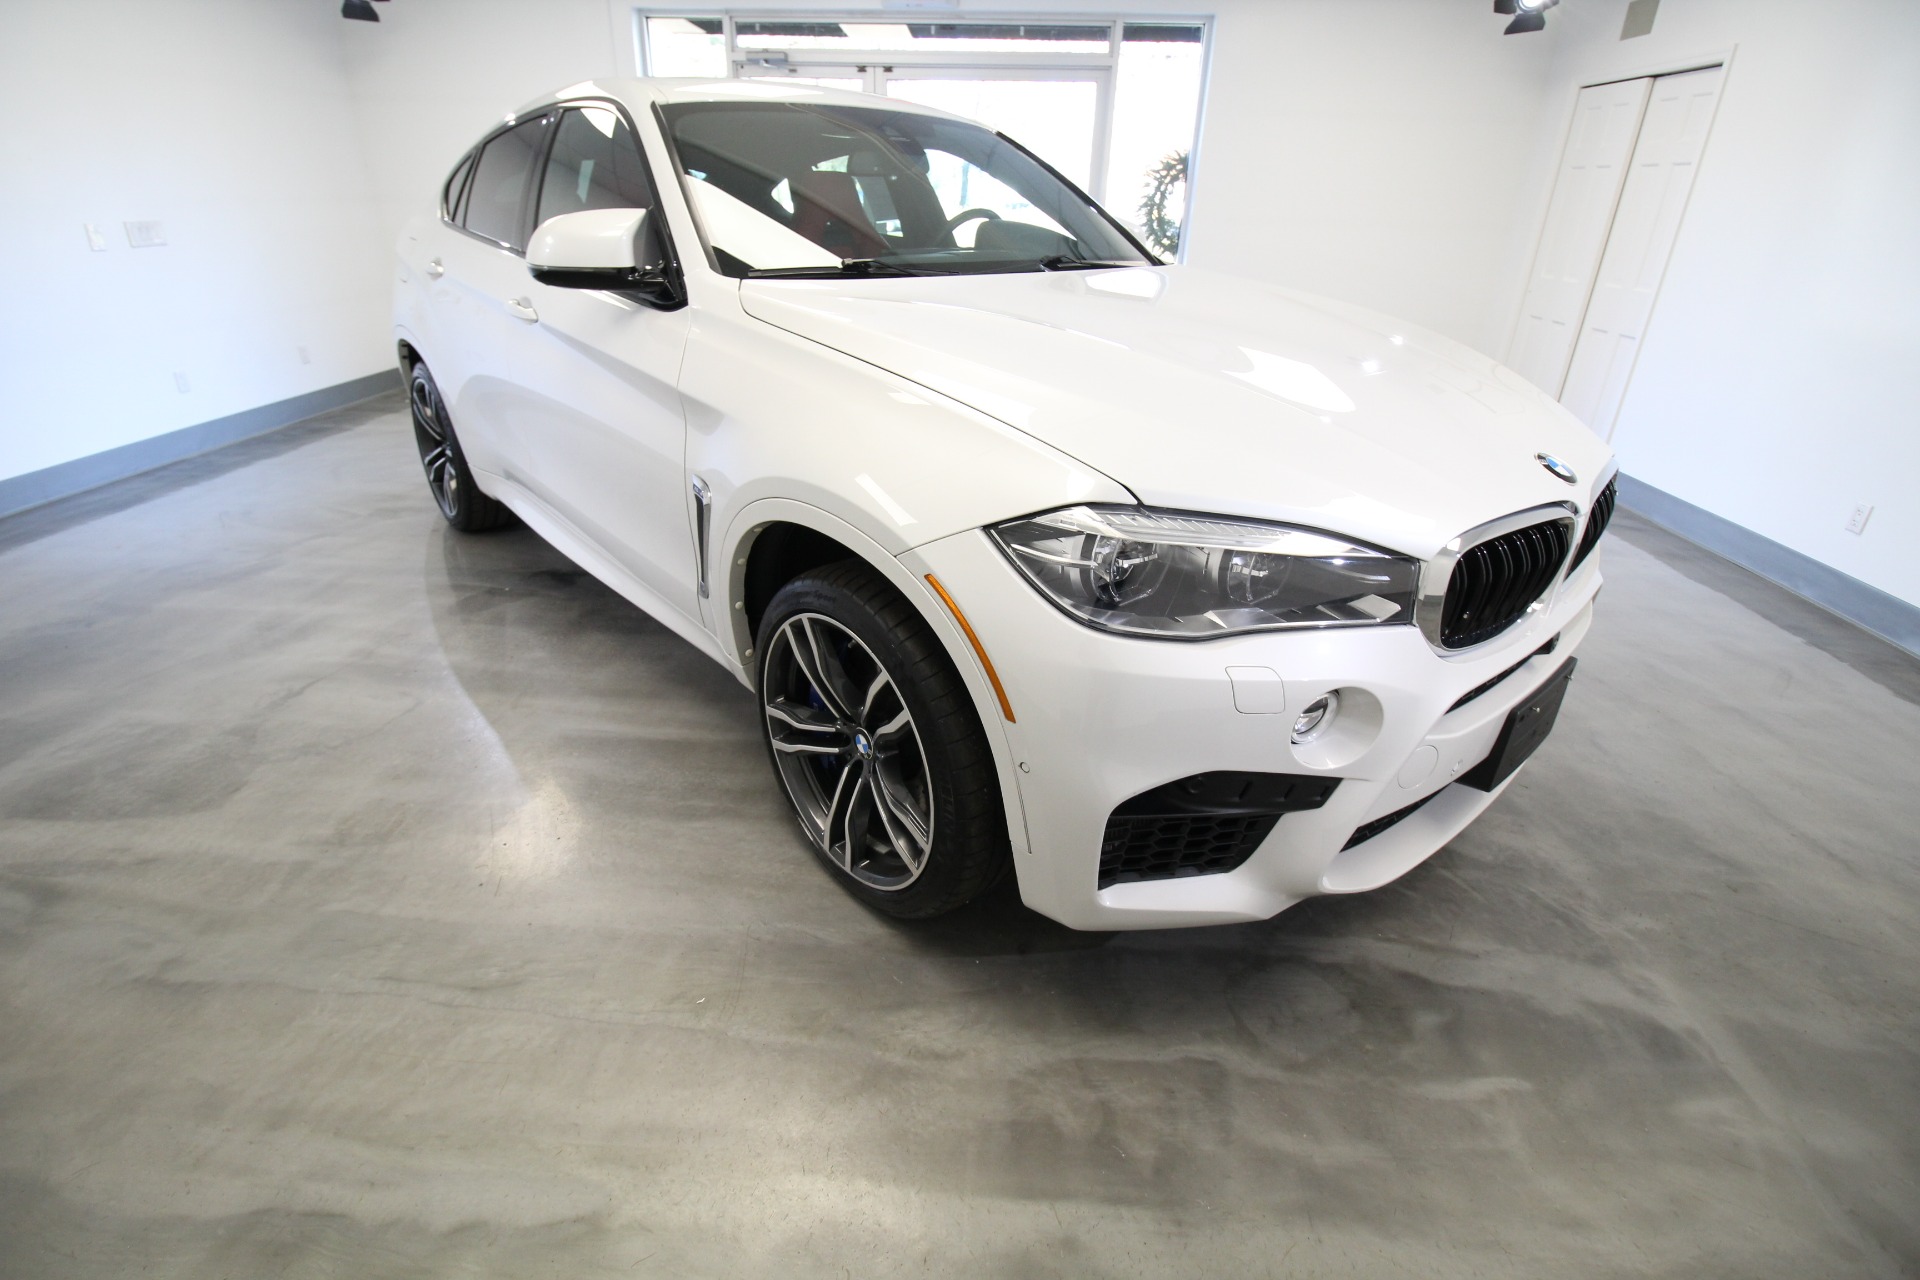 Used 2017 Alpine White BMW X6 M Beautiful White With Red Interior | Albany, NY